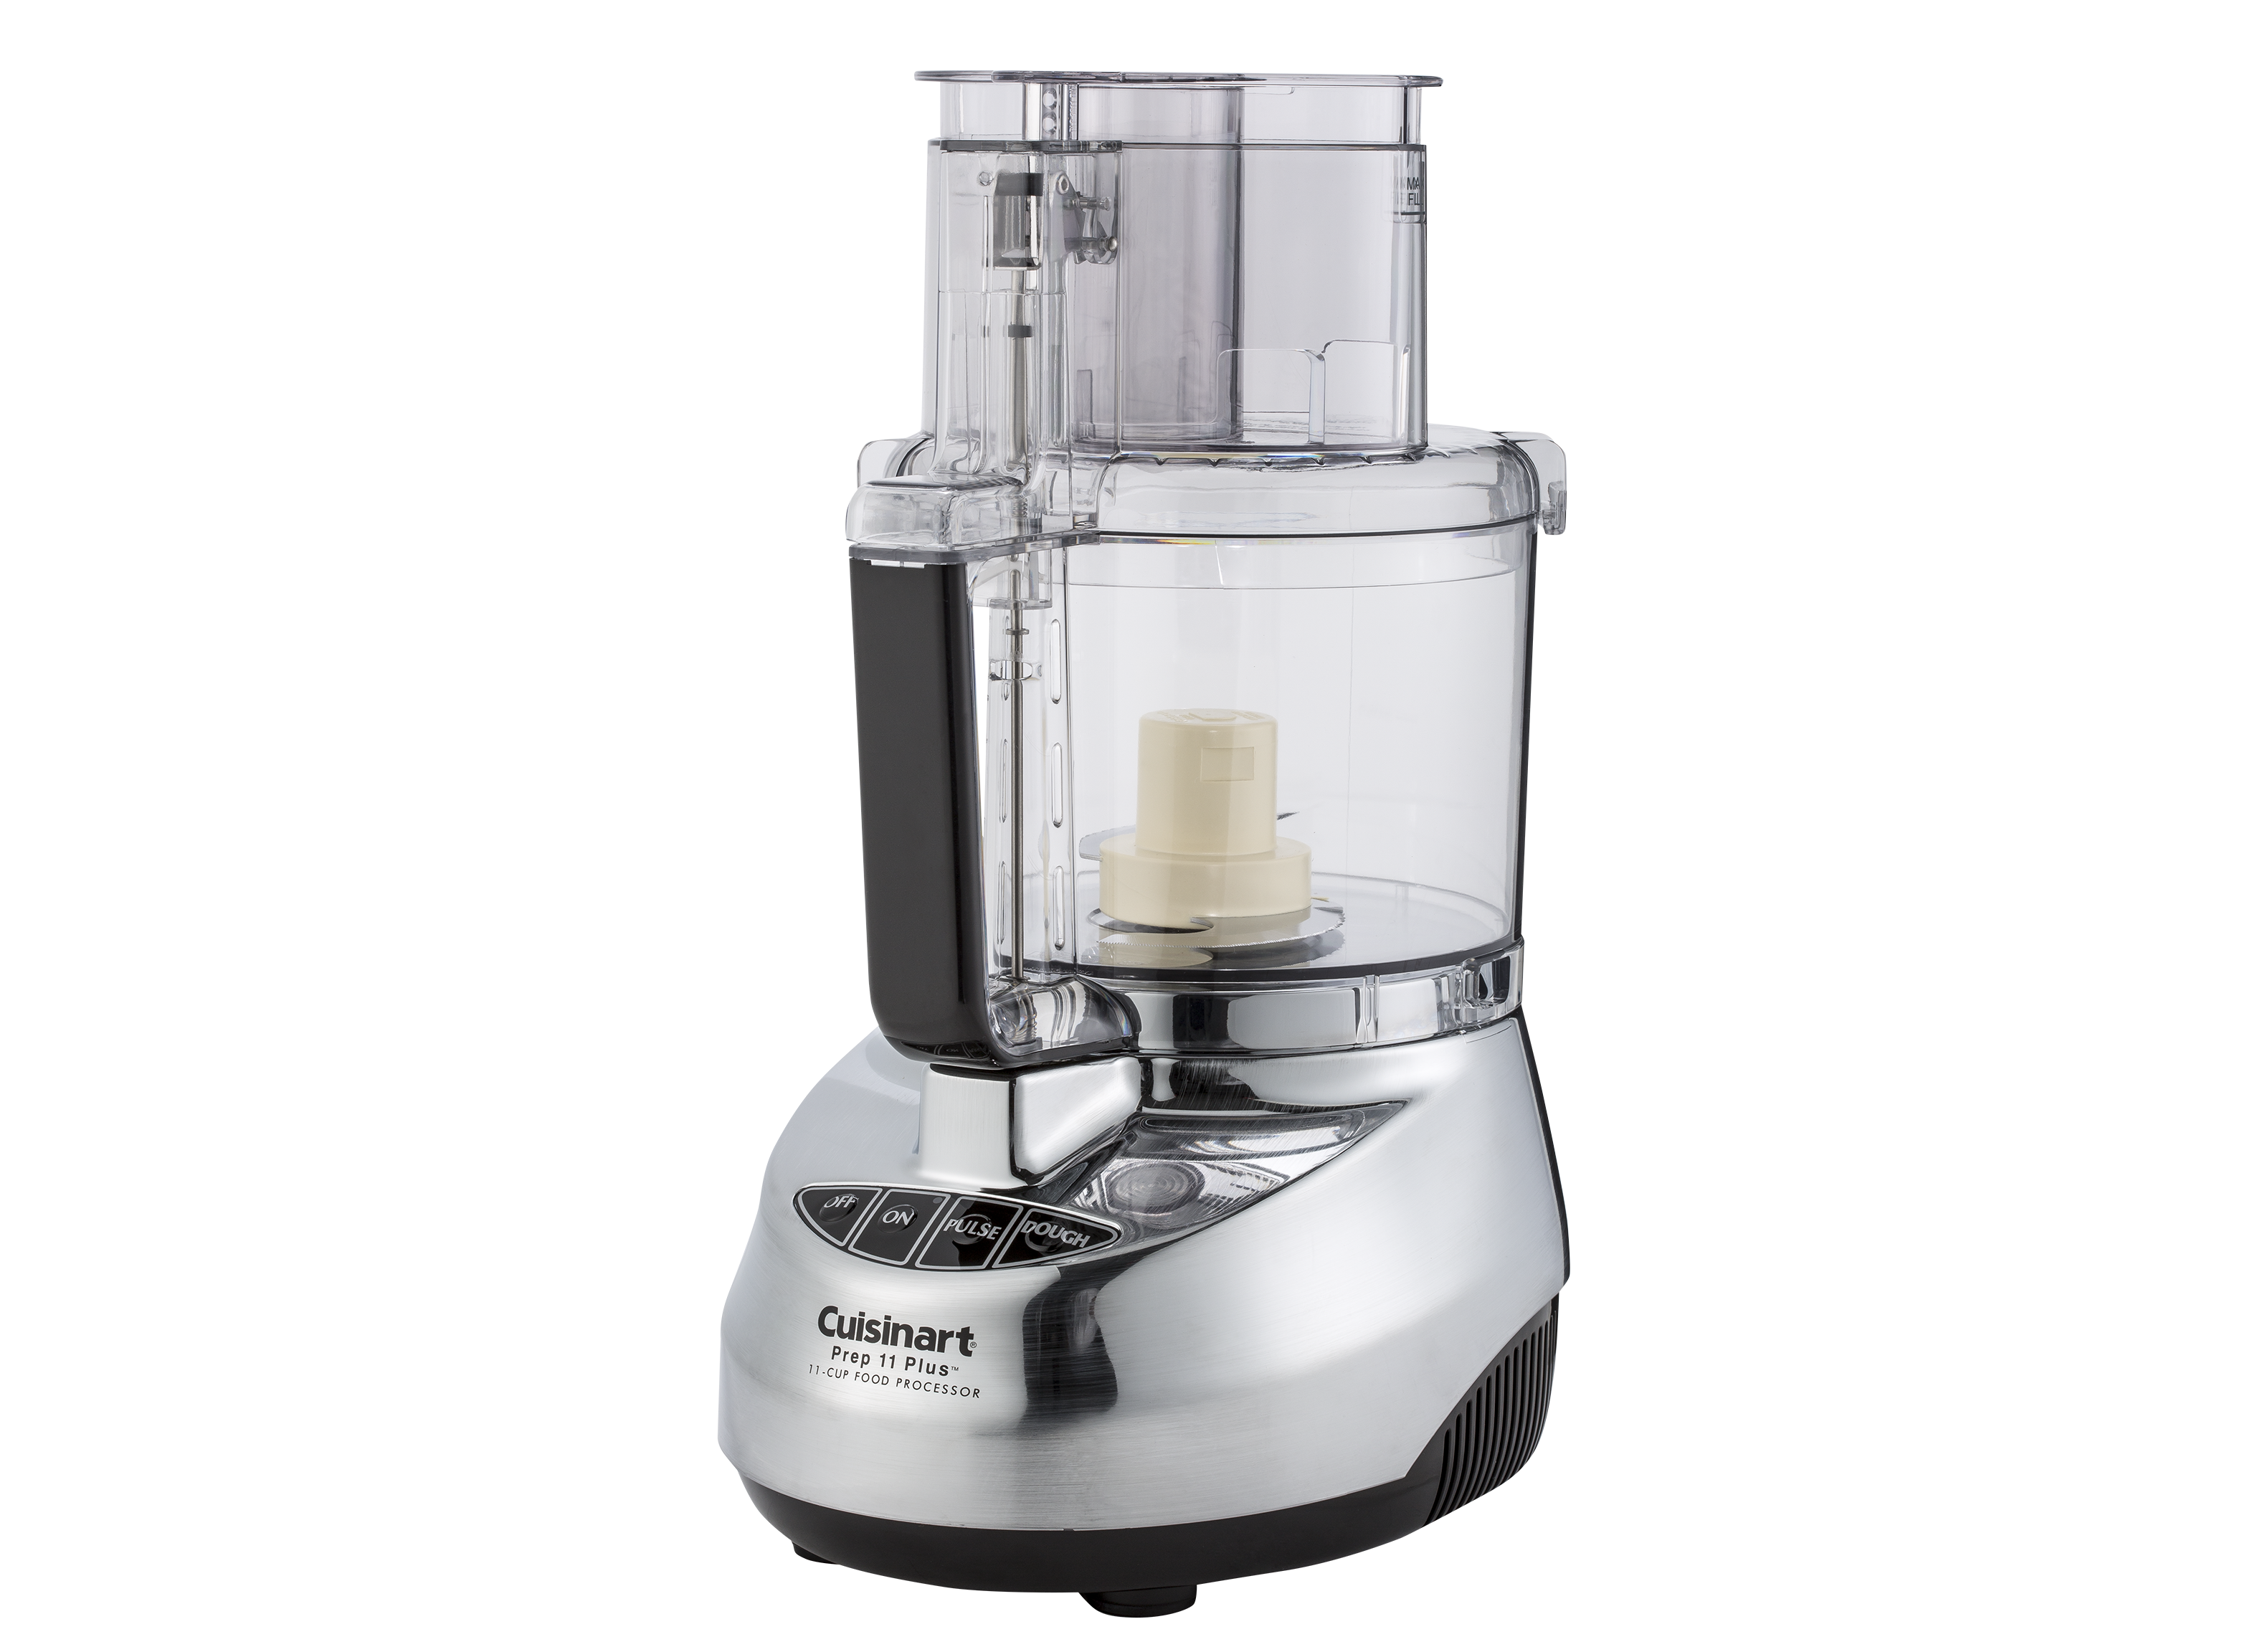 https://crdms.images.consumerreports.org/prod/products/cr/models/387448-foodprocessors-cuisinart-prep11plusdlc2011chby.png